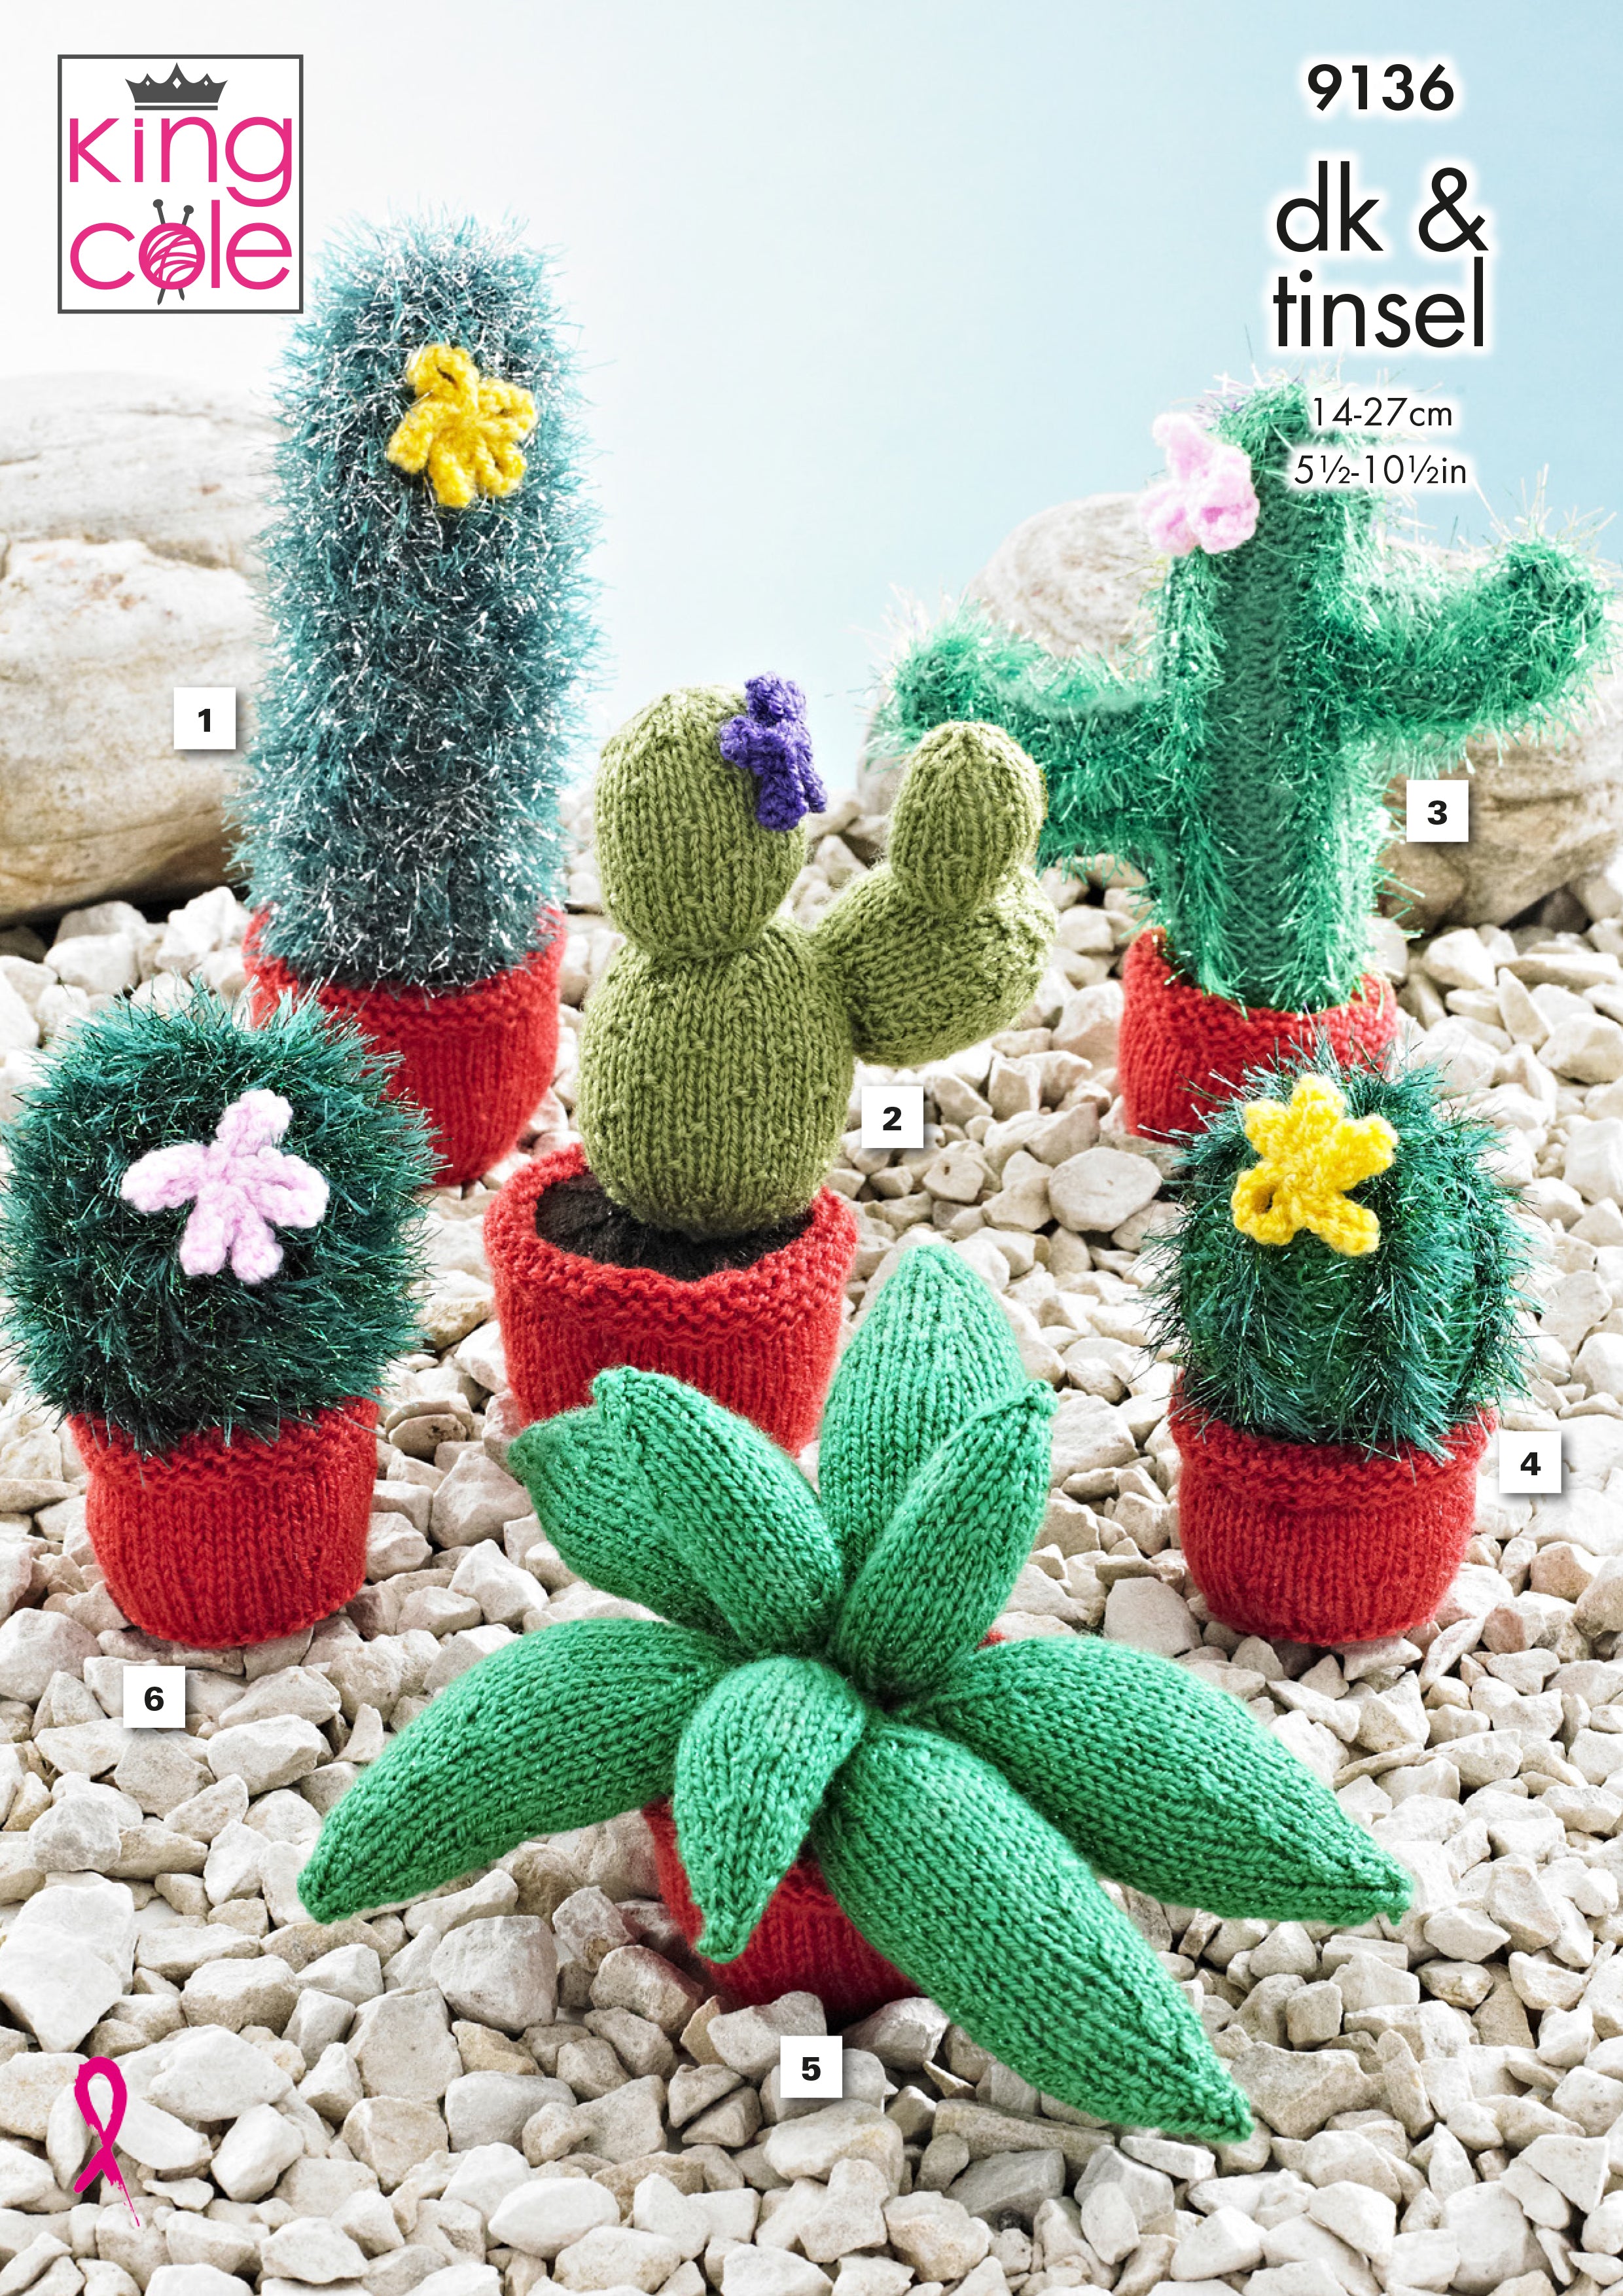 King Cole Novelty Cactus Knitting Pattern 9136 - Tinsel Chunky